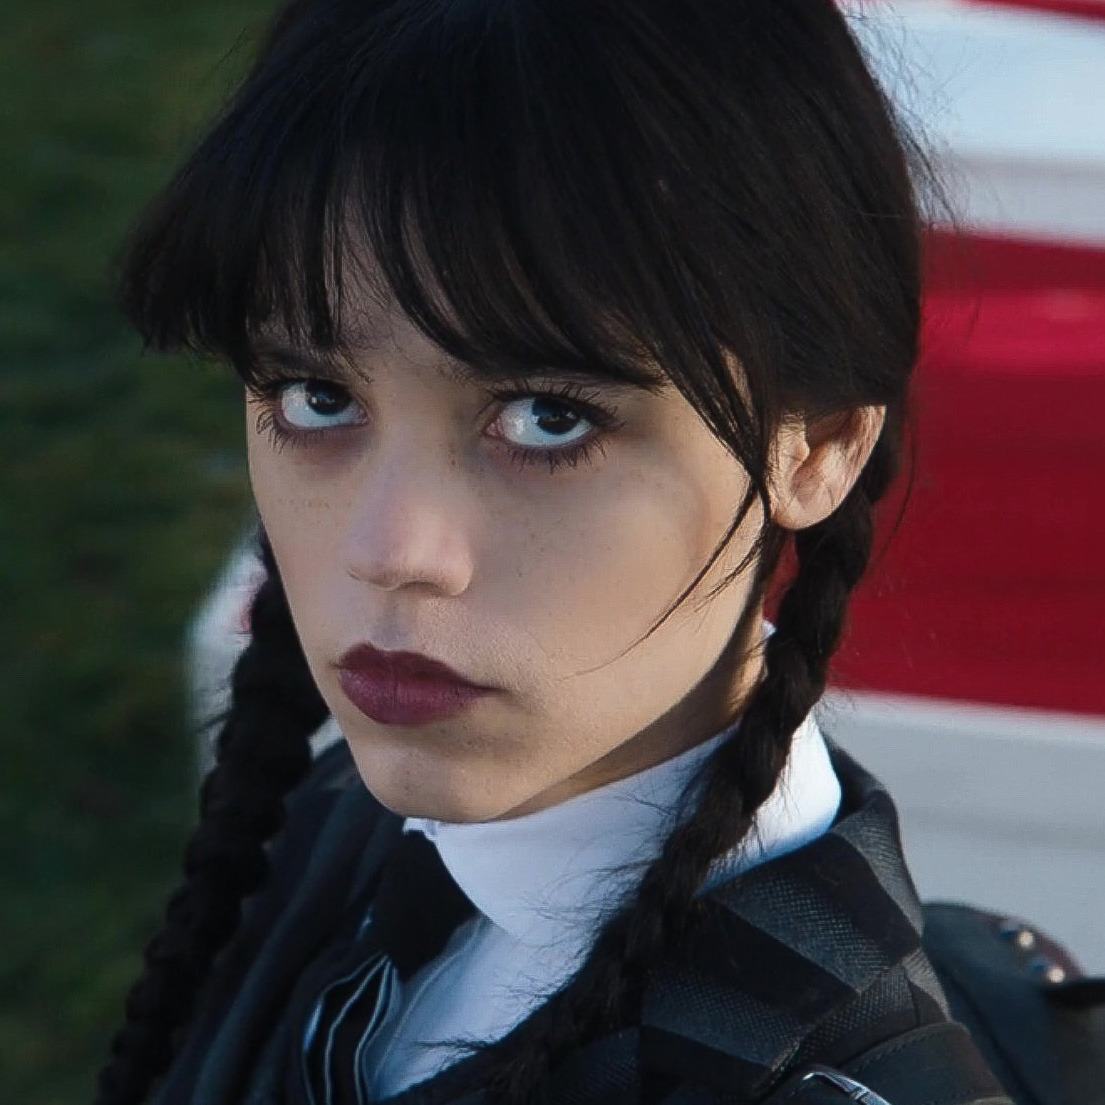 Wednesday Addams images for your profile pictures, from Netflix Wednesday -  